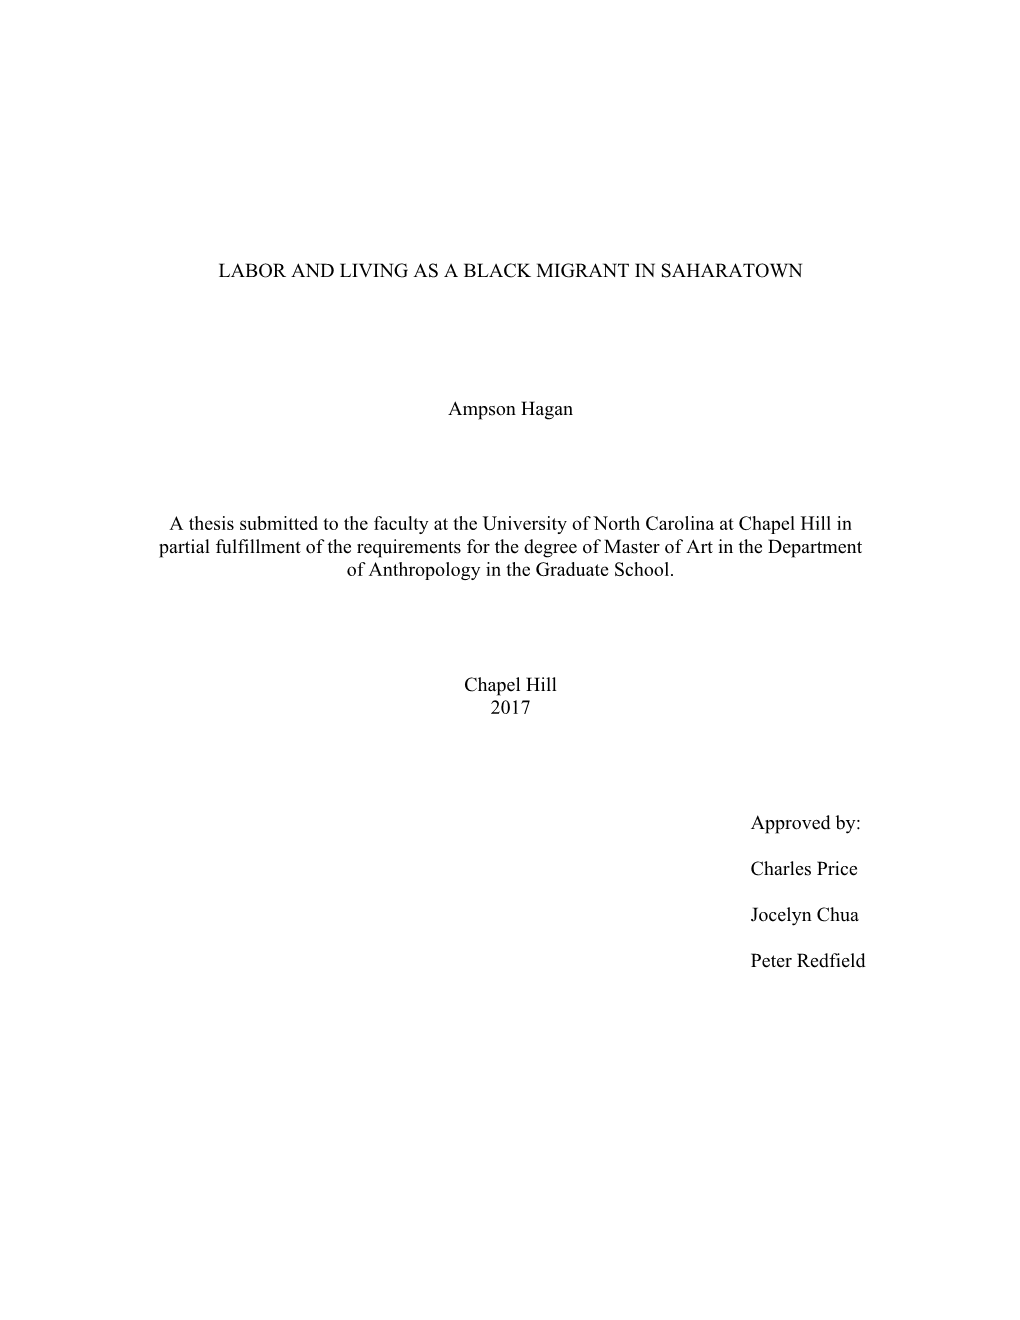 LABOR and LIVING AS a BLACK MIGRANT in SAHARATOWN Ampson Hagan a Thesis Submitted to the Faculty at the University of North Caro